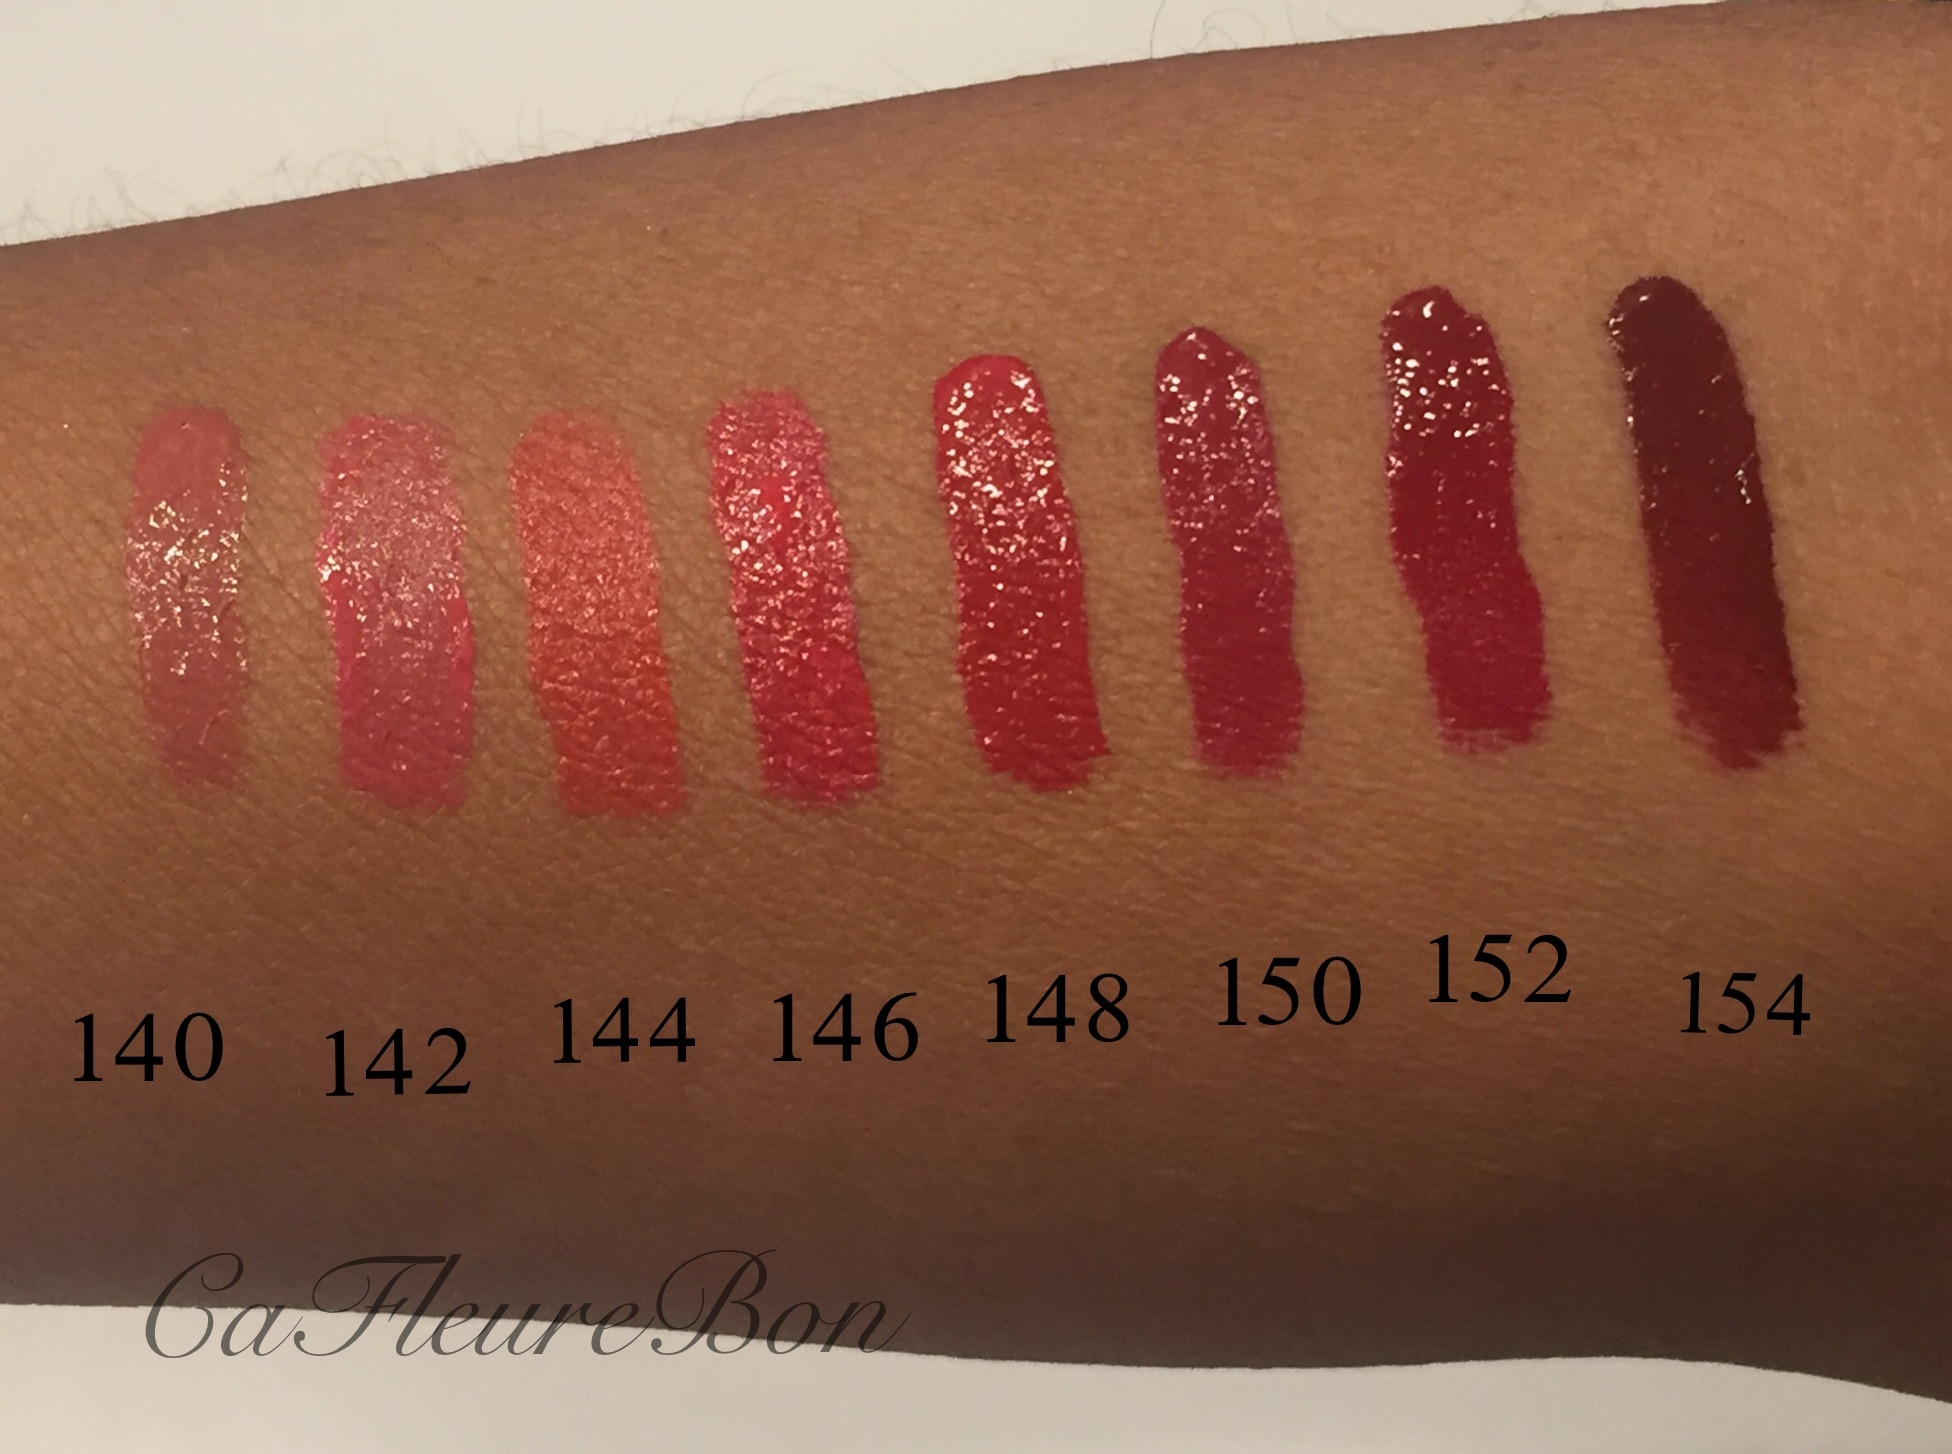 chanel-rouge-allure-ink-lip-colour-swatches-140-142-144-146-148